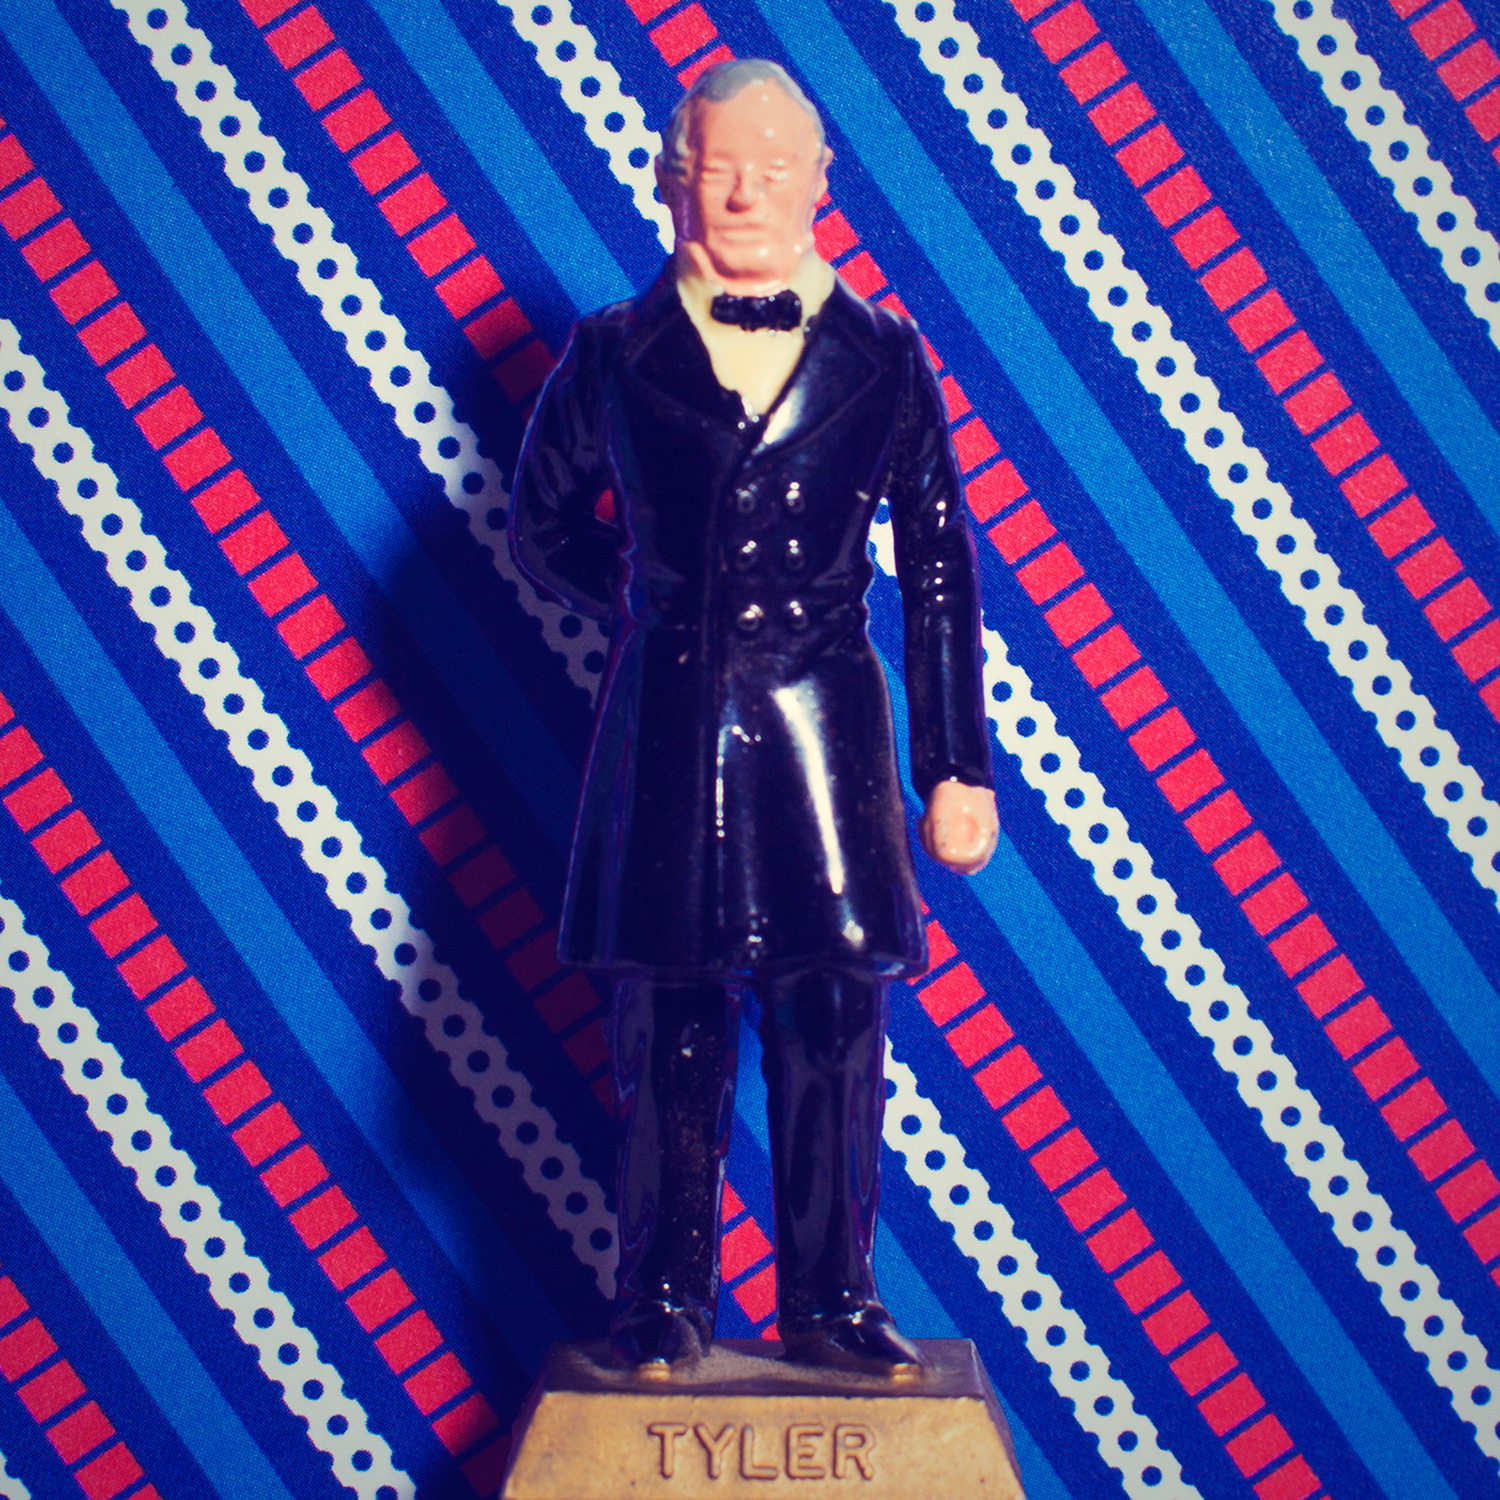 John Tyler: Ghosts and the vice presidency